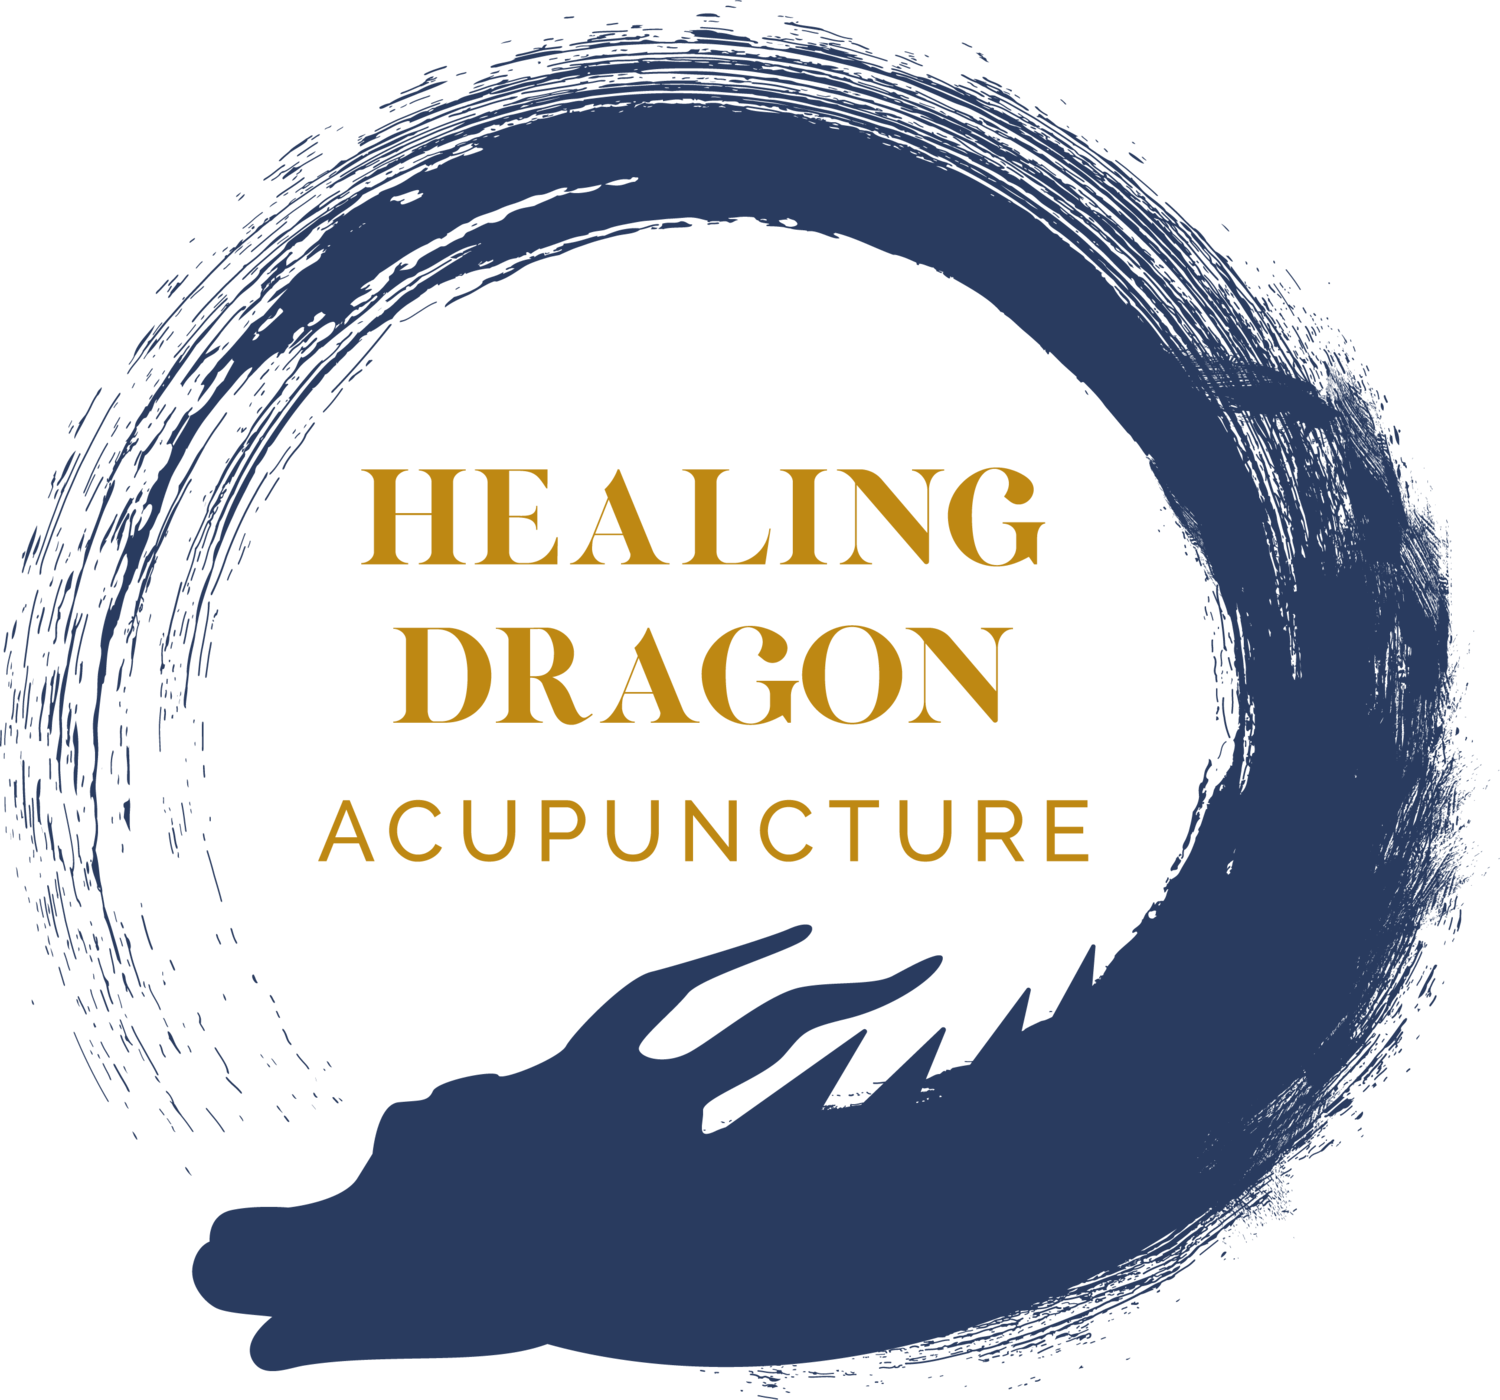 Healing Dragon Acupuncture